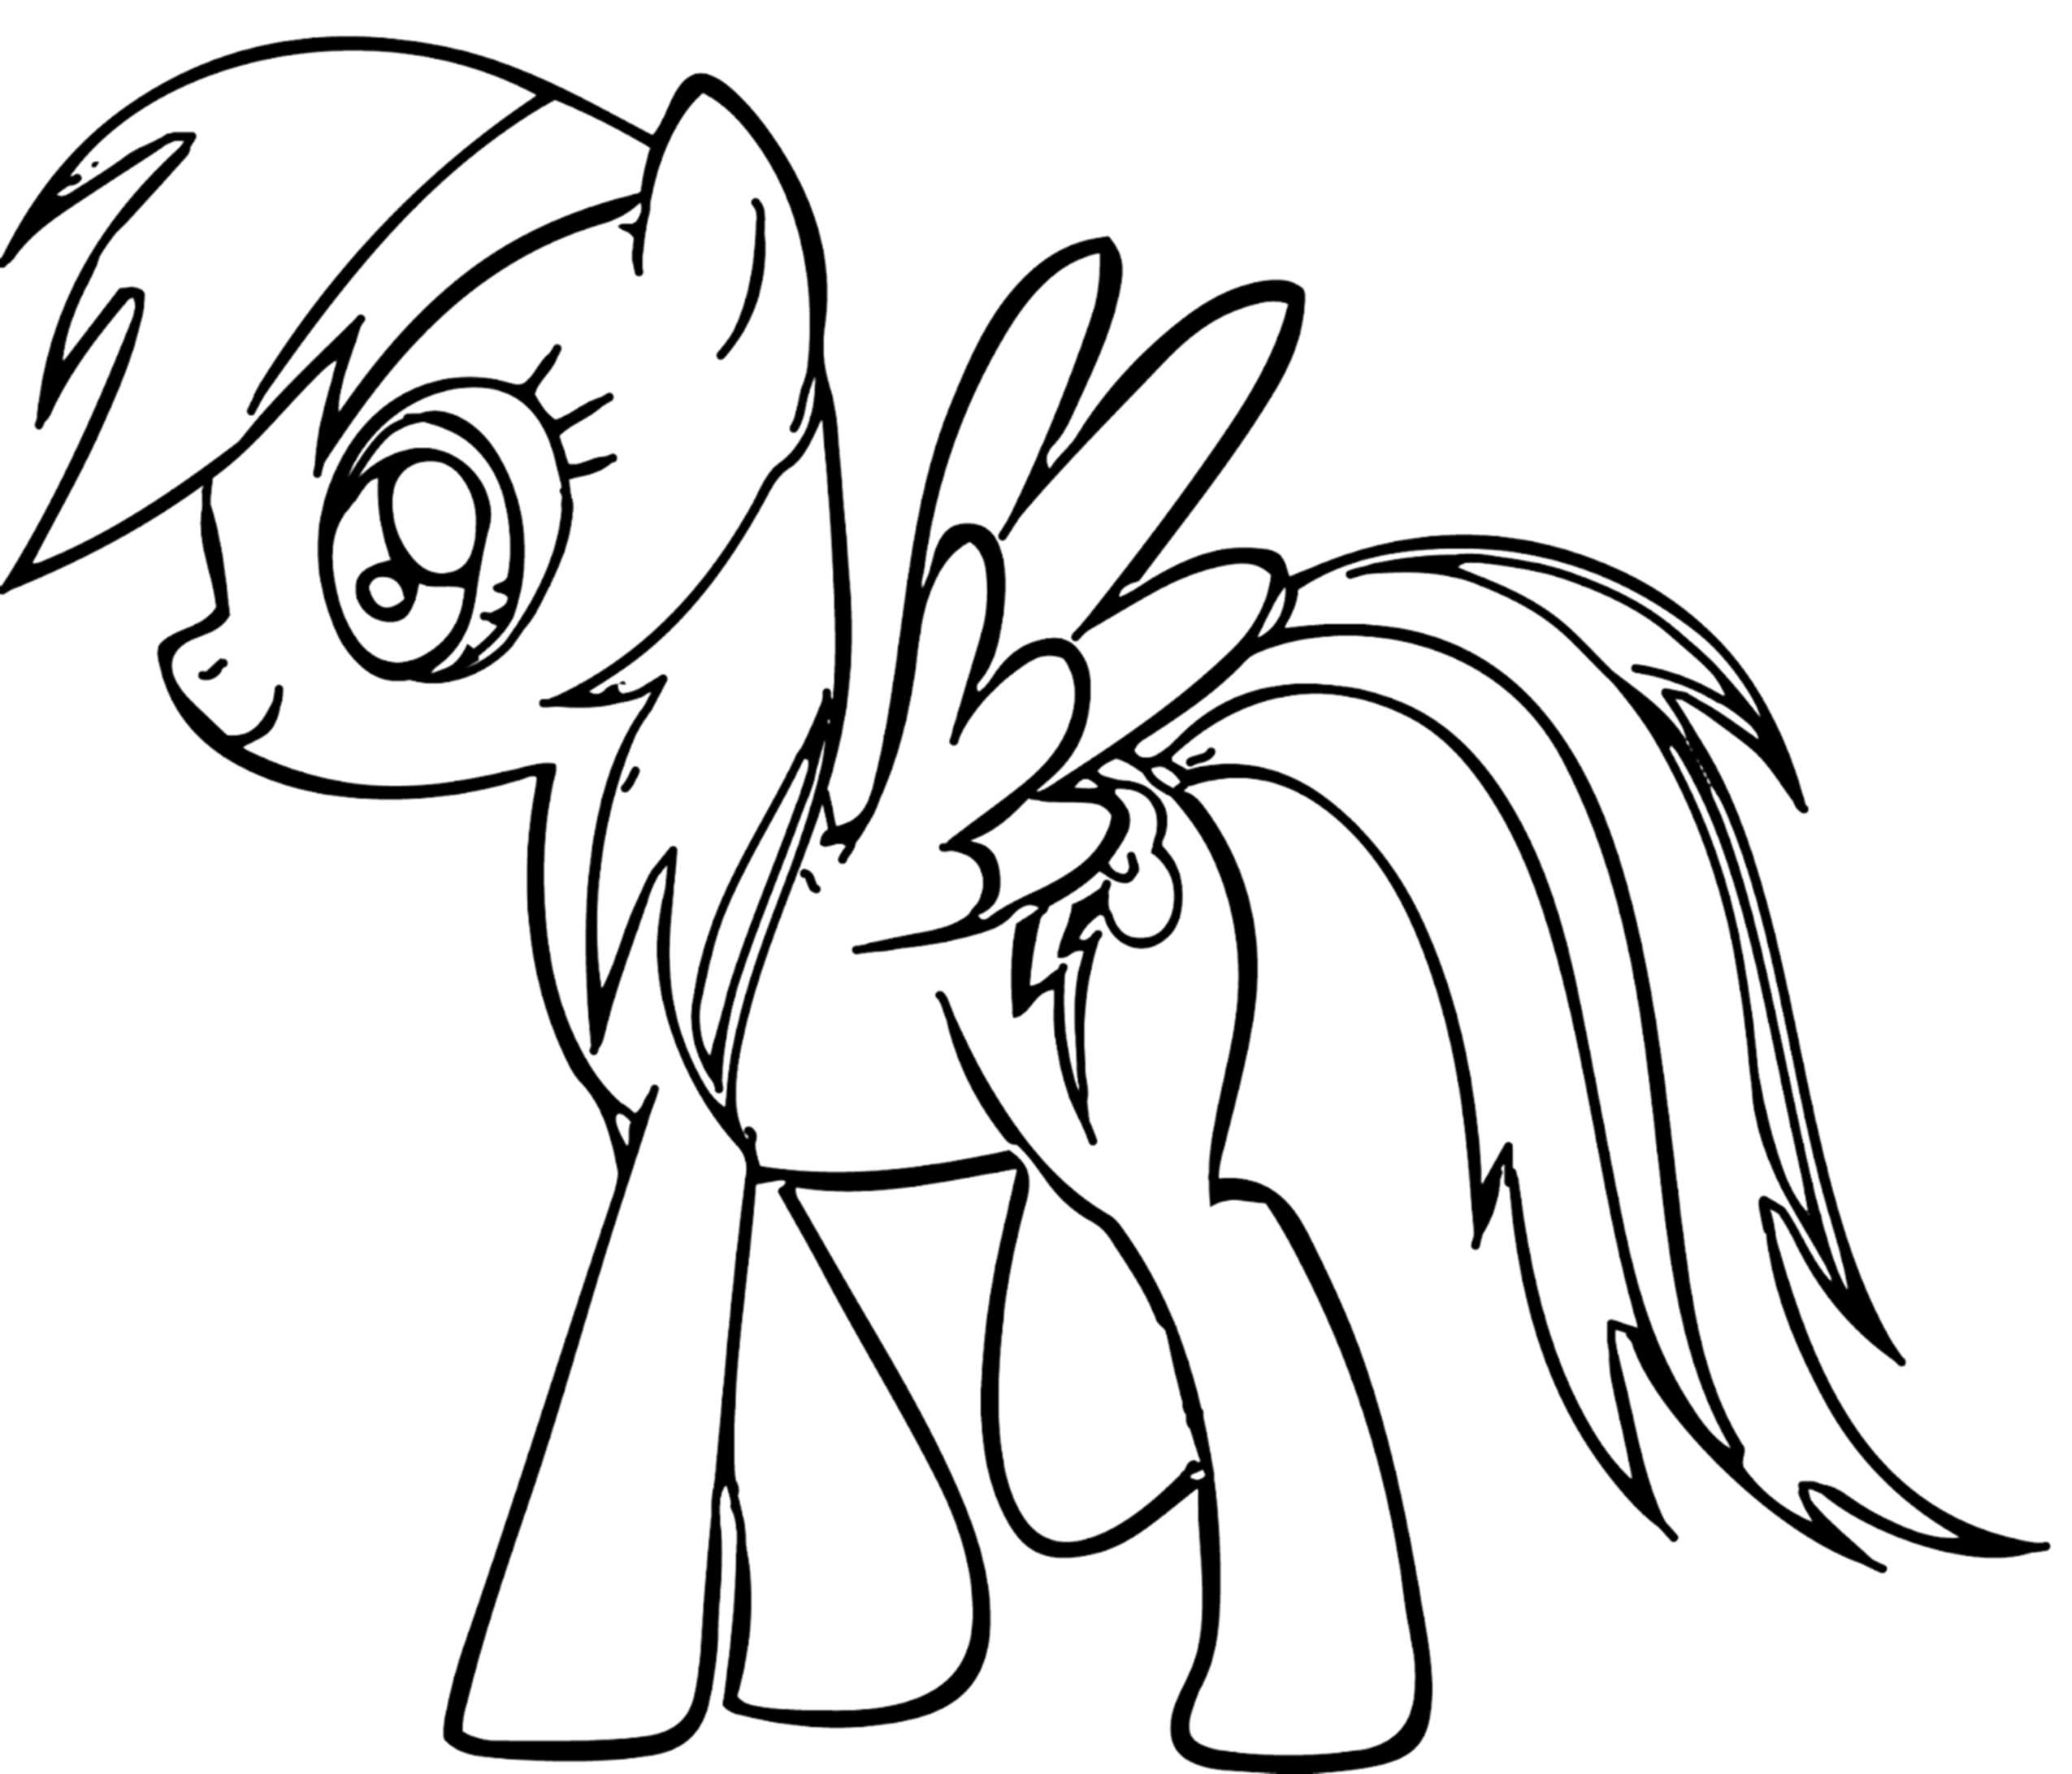 rainbow-dash-coloring-pages-best-coloring-pages-for-kids